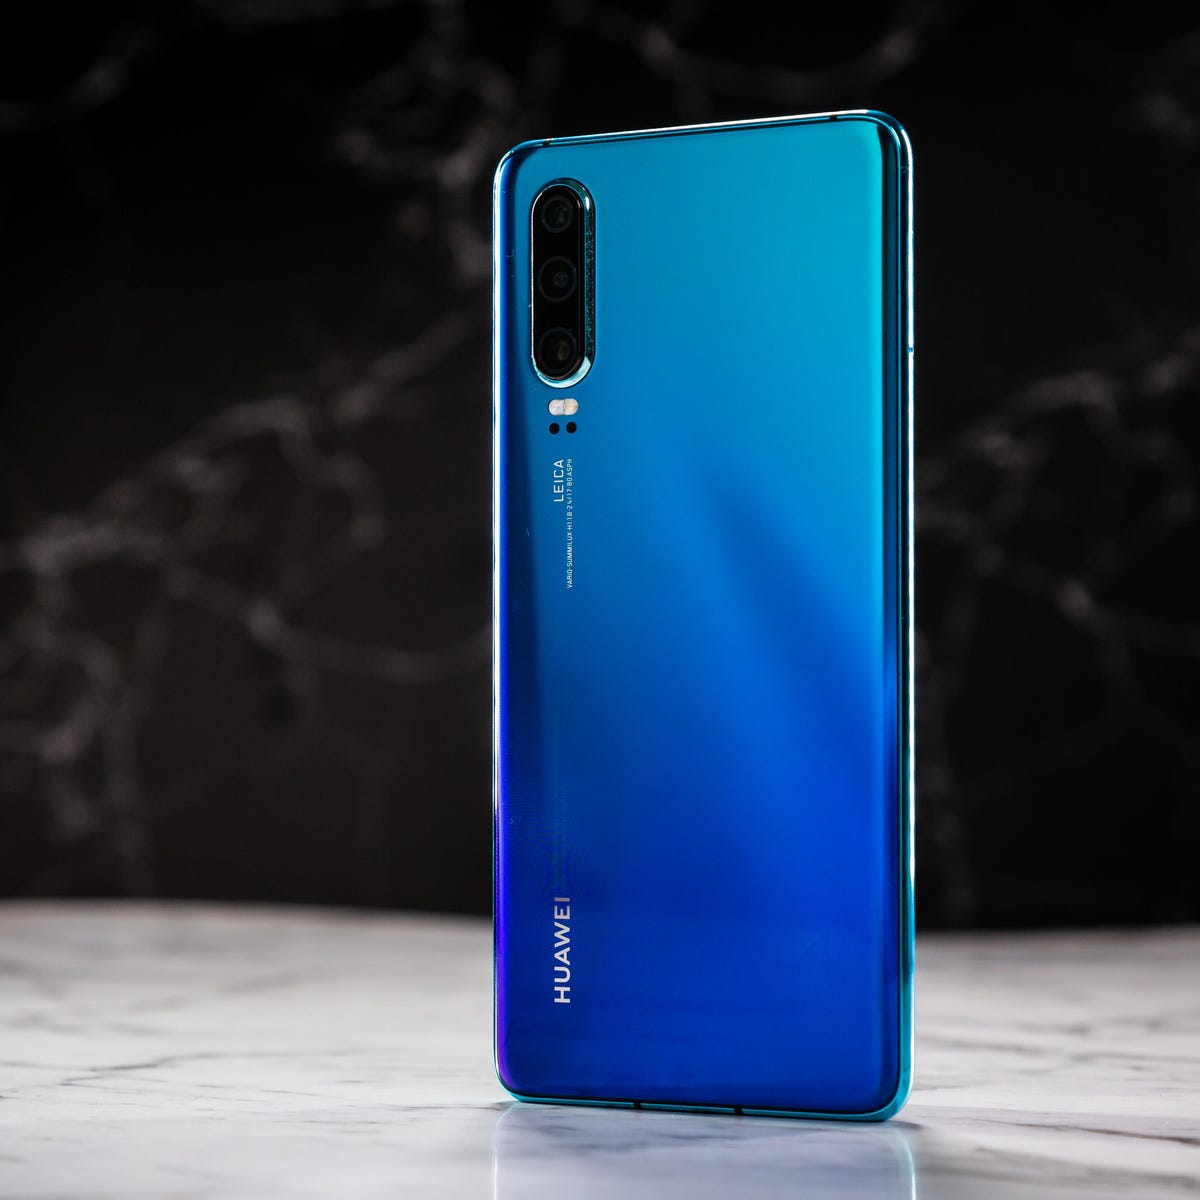 Huawei P30 review: This phone takes ridiculous photos for a reasonable  price - CNET